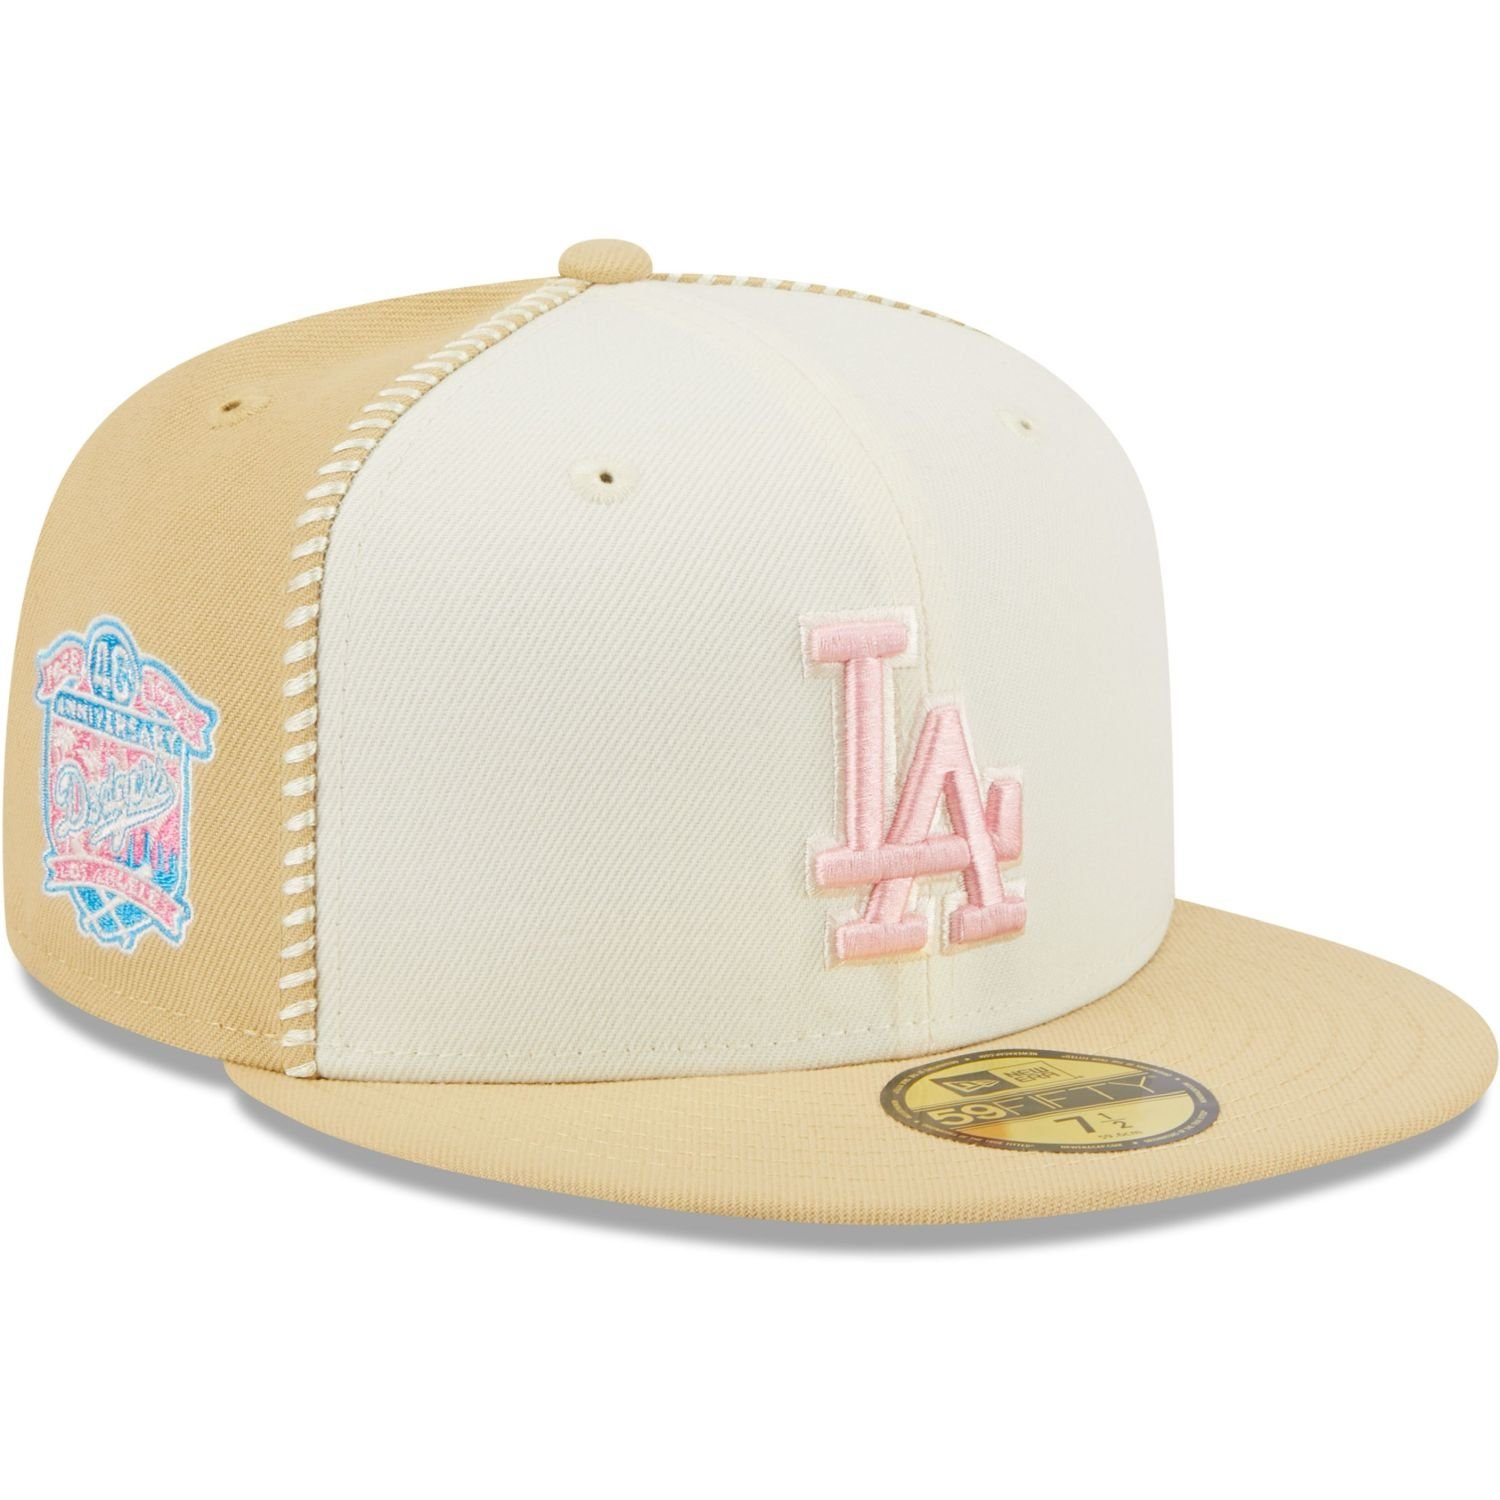 New Era Fitted Cap 59Fifty SEAM STITCH Los Angeles Dodgers